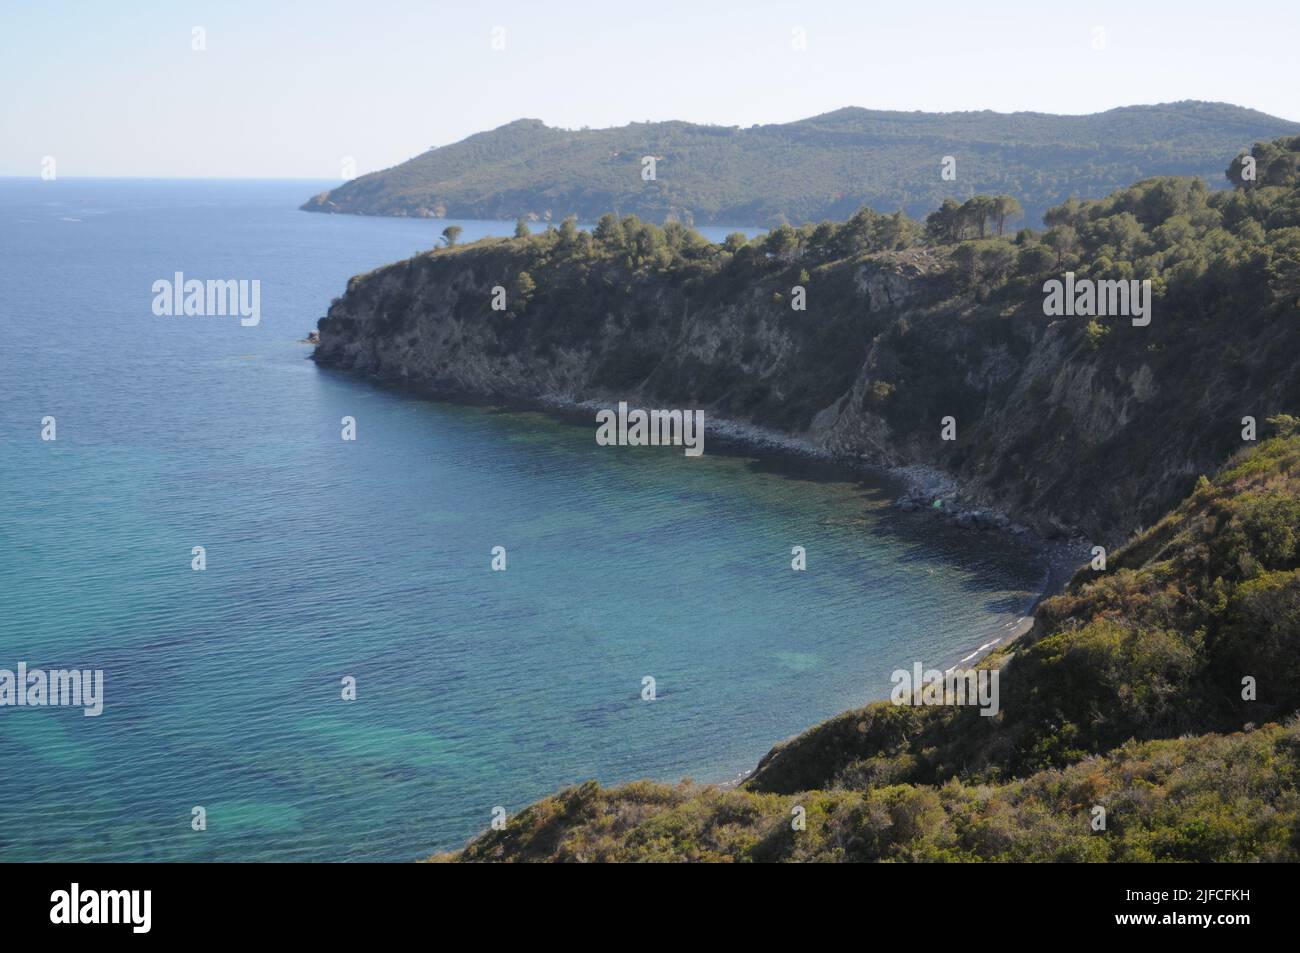 Views from above of the splendid nature of the island of Elba, in Tuscany Stock Photo